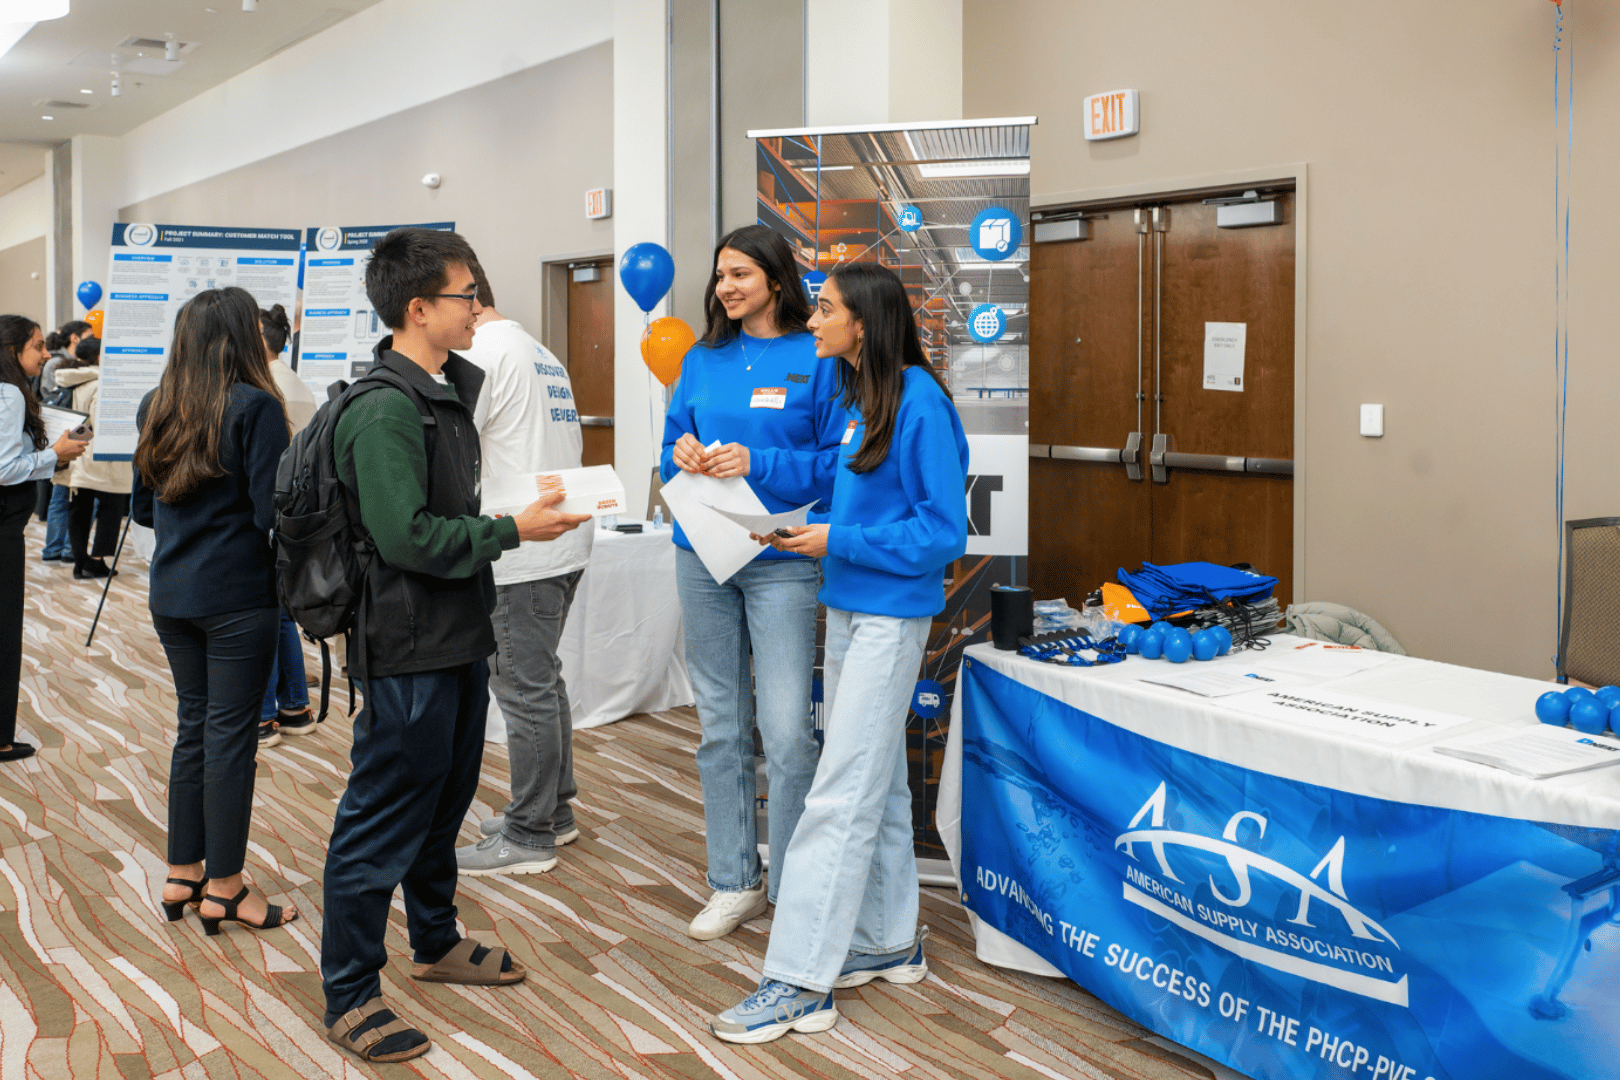 American Supply Association recruiters and student talking